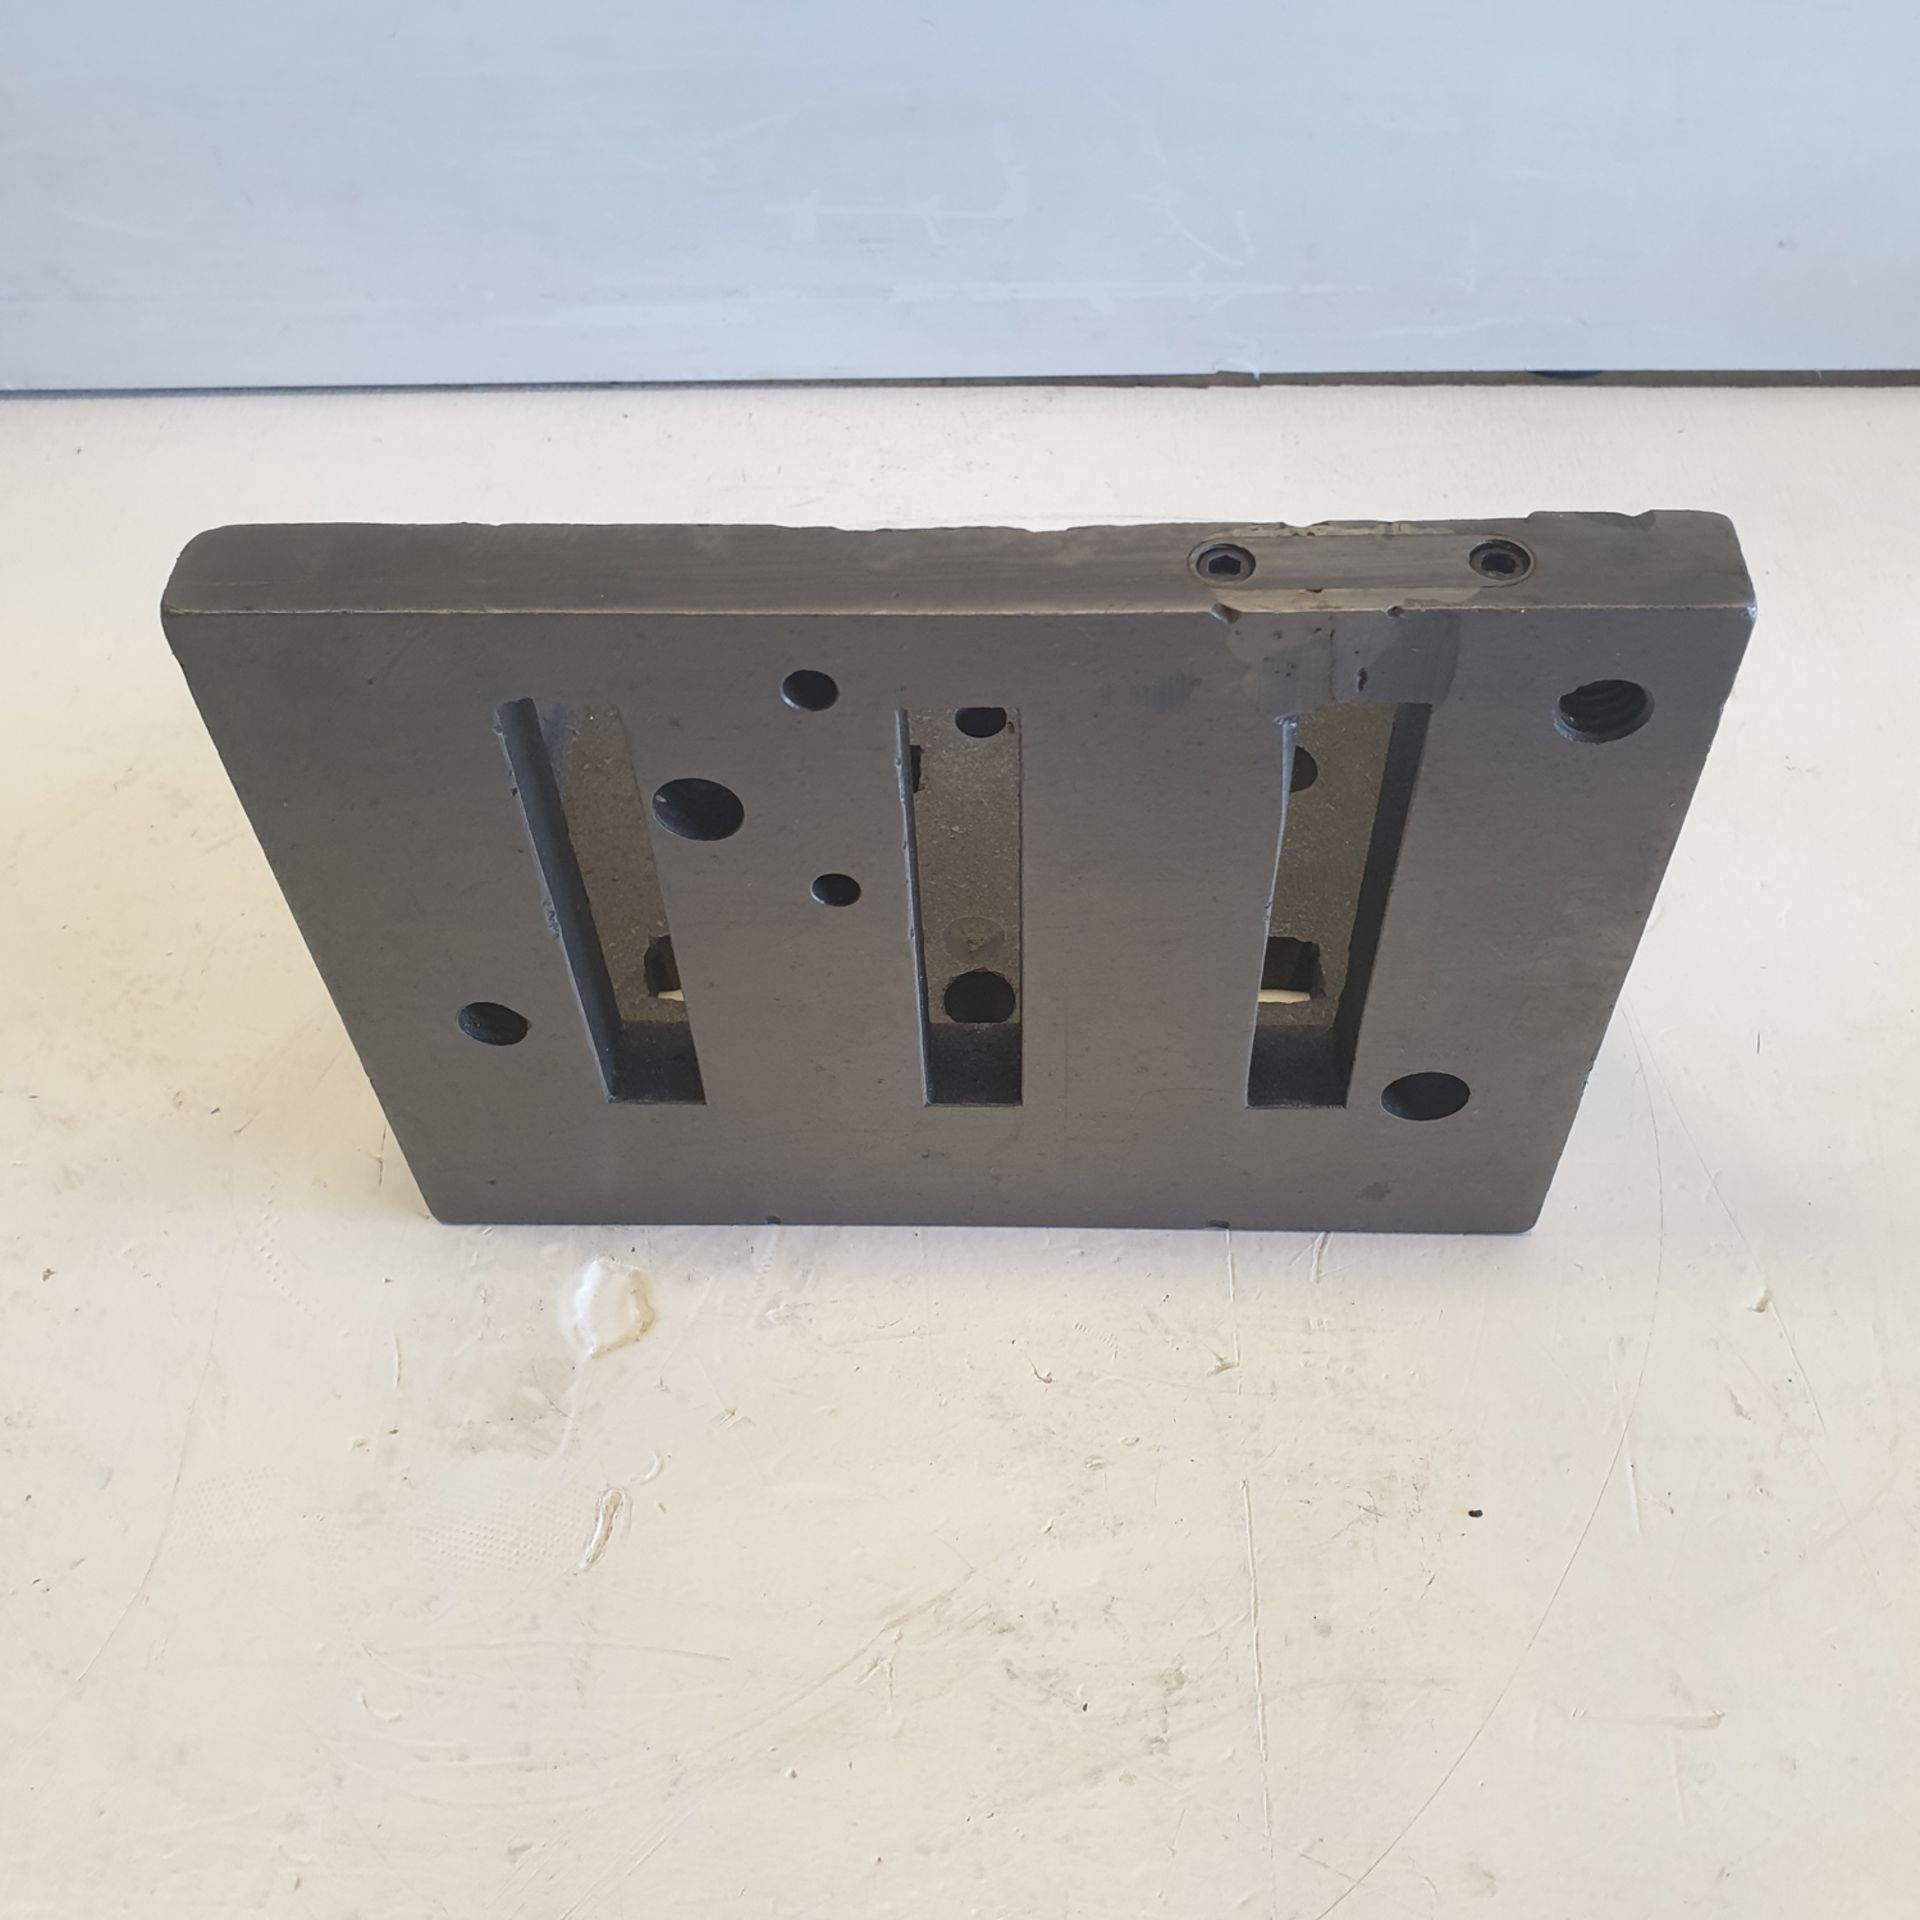 Slotted Angle Plate. Approx Dimensions 8" x 6", 8" x 5". - Image 2 of 6